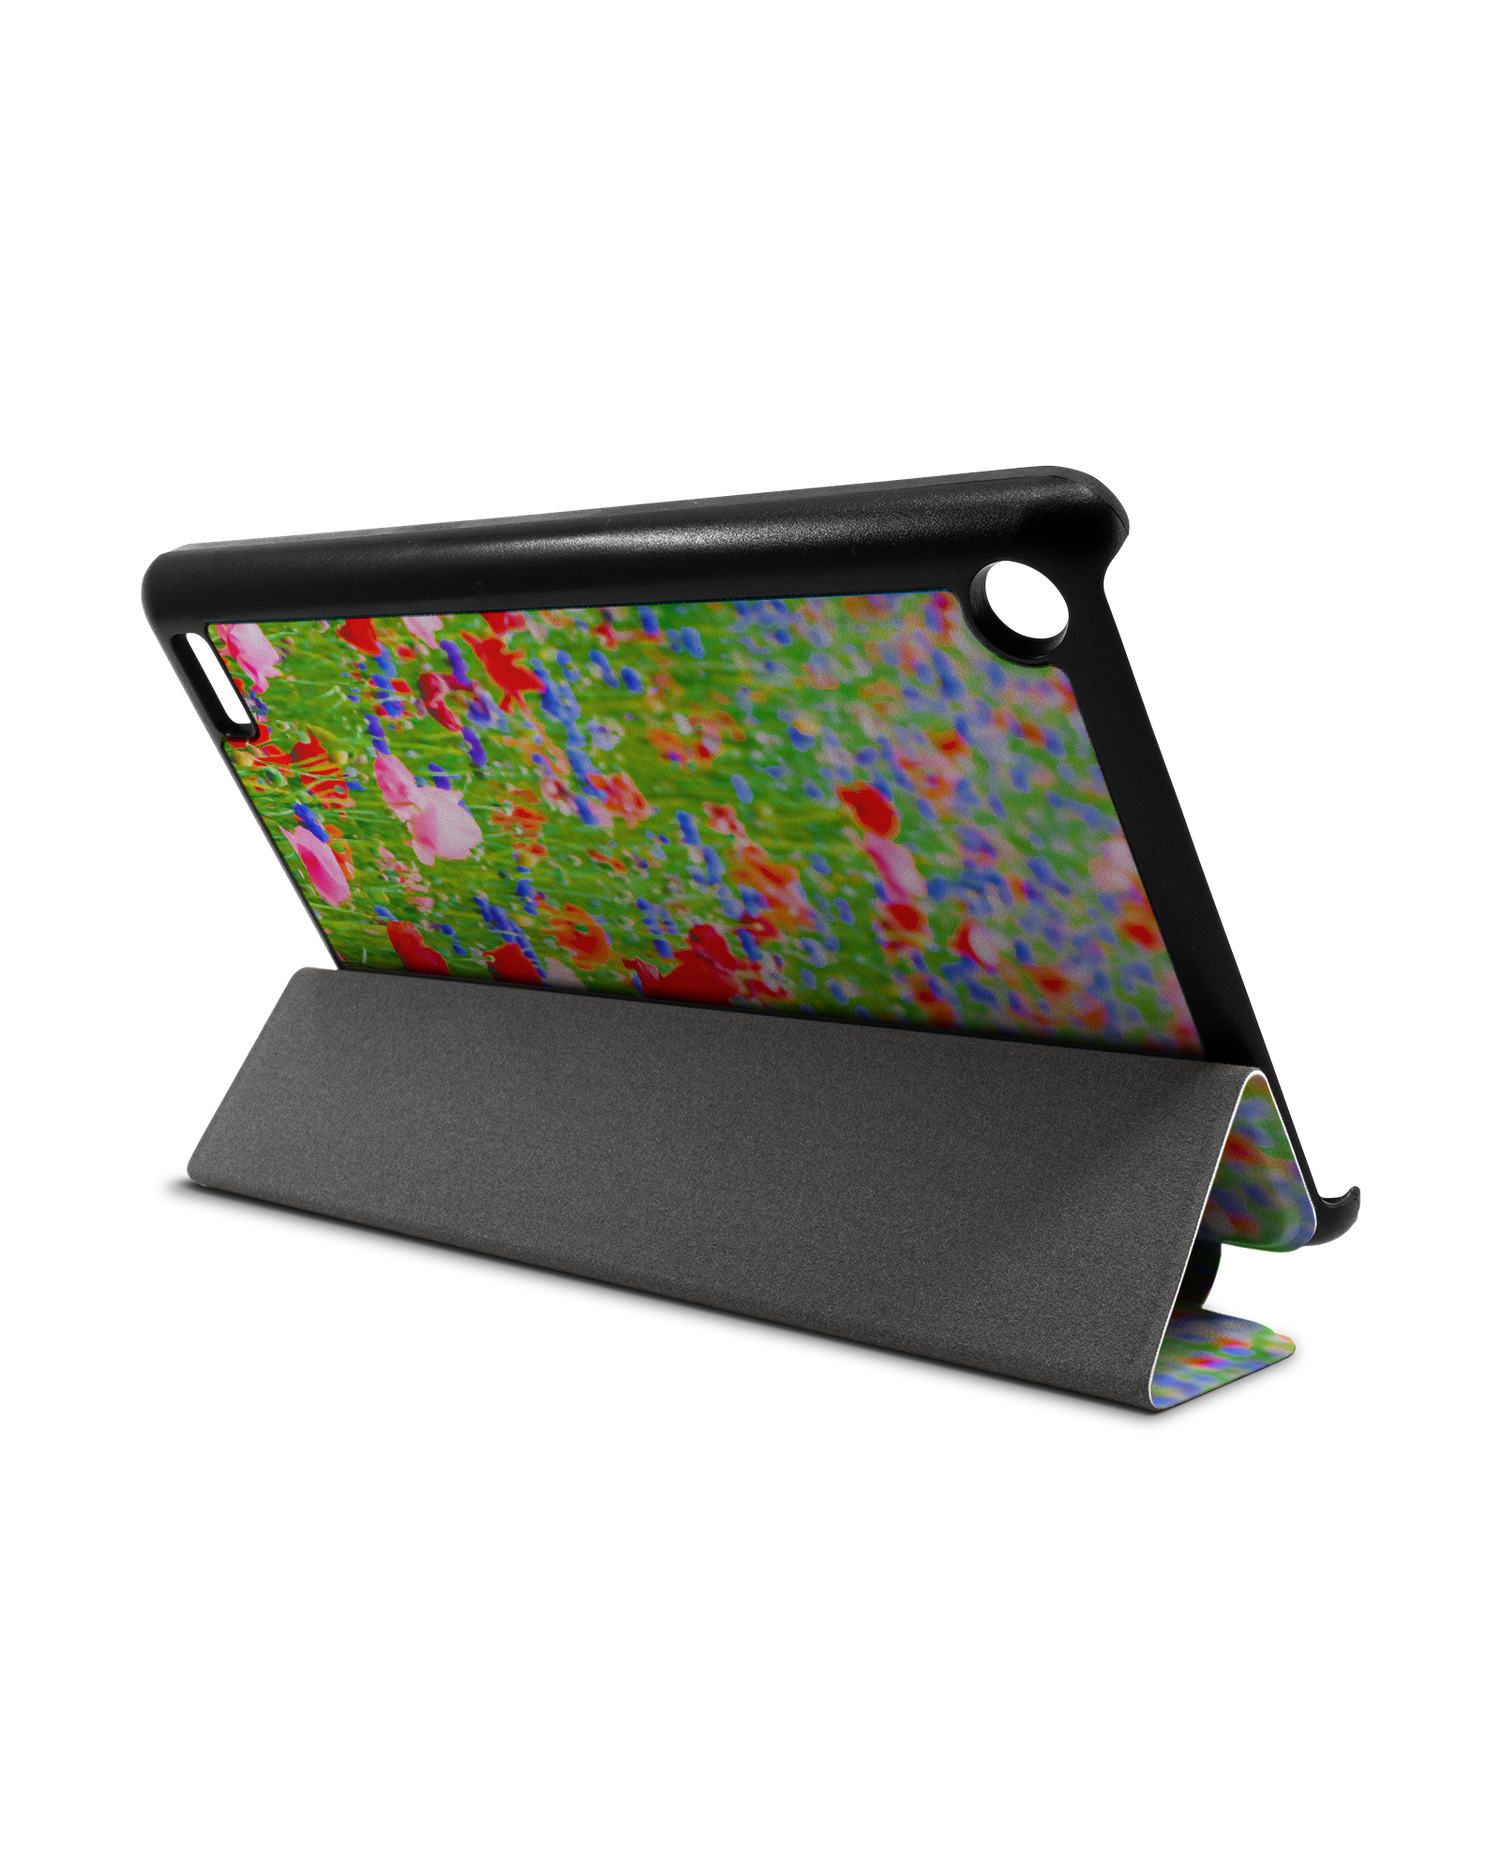 Tropical Snakes Tablet Smart Case for Amazon Fire 7: Used as Stand